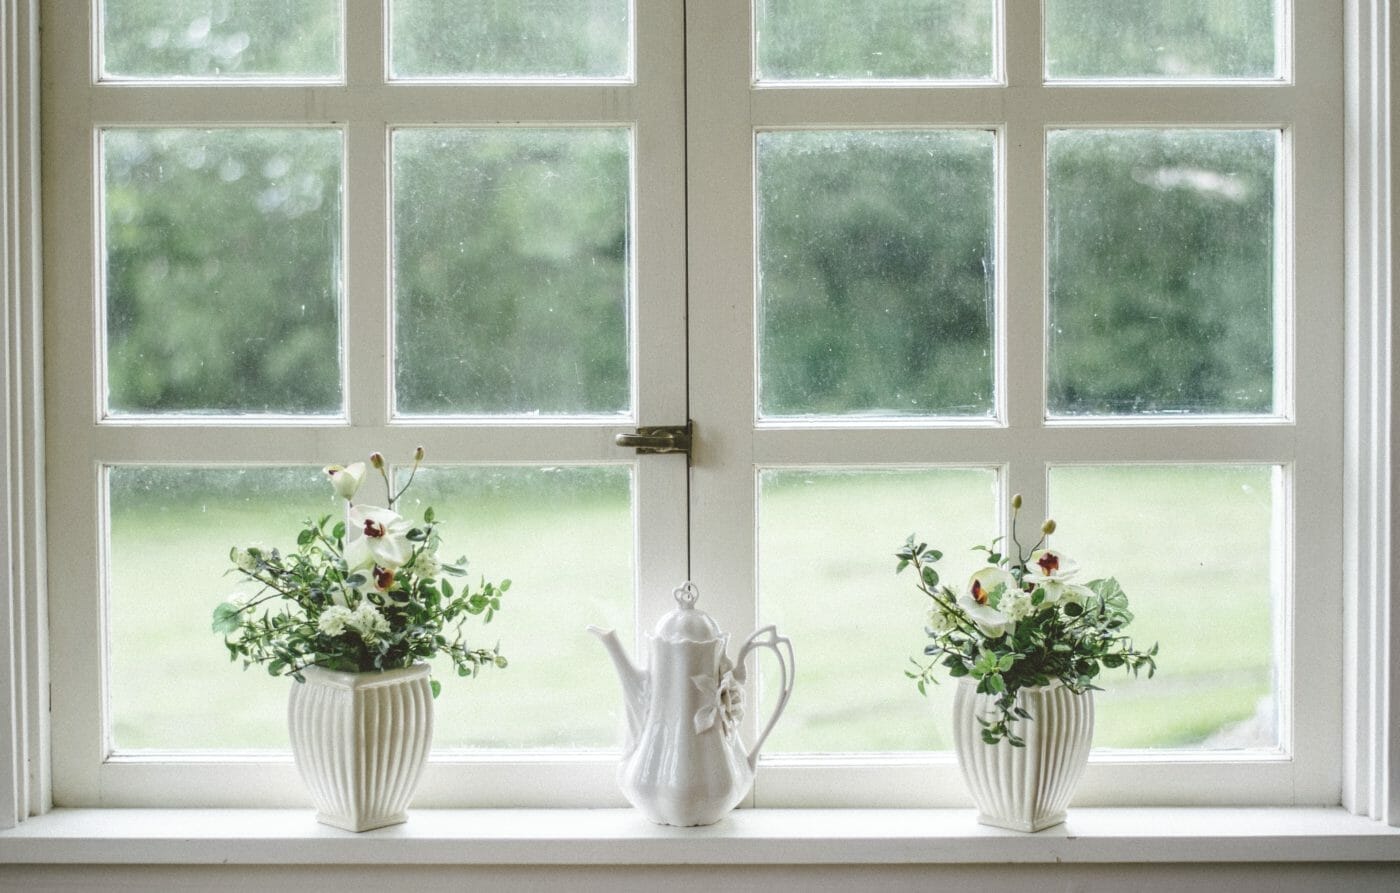 view looking outside of a window with plants on the windowsill